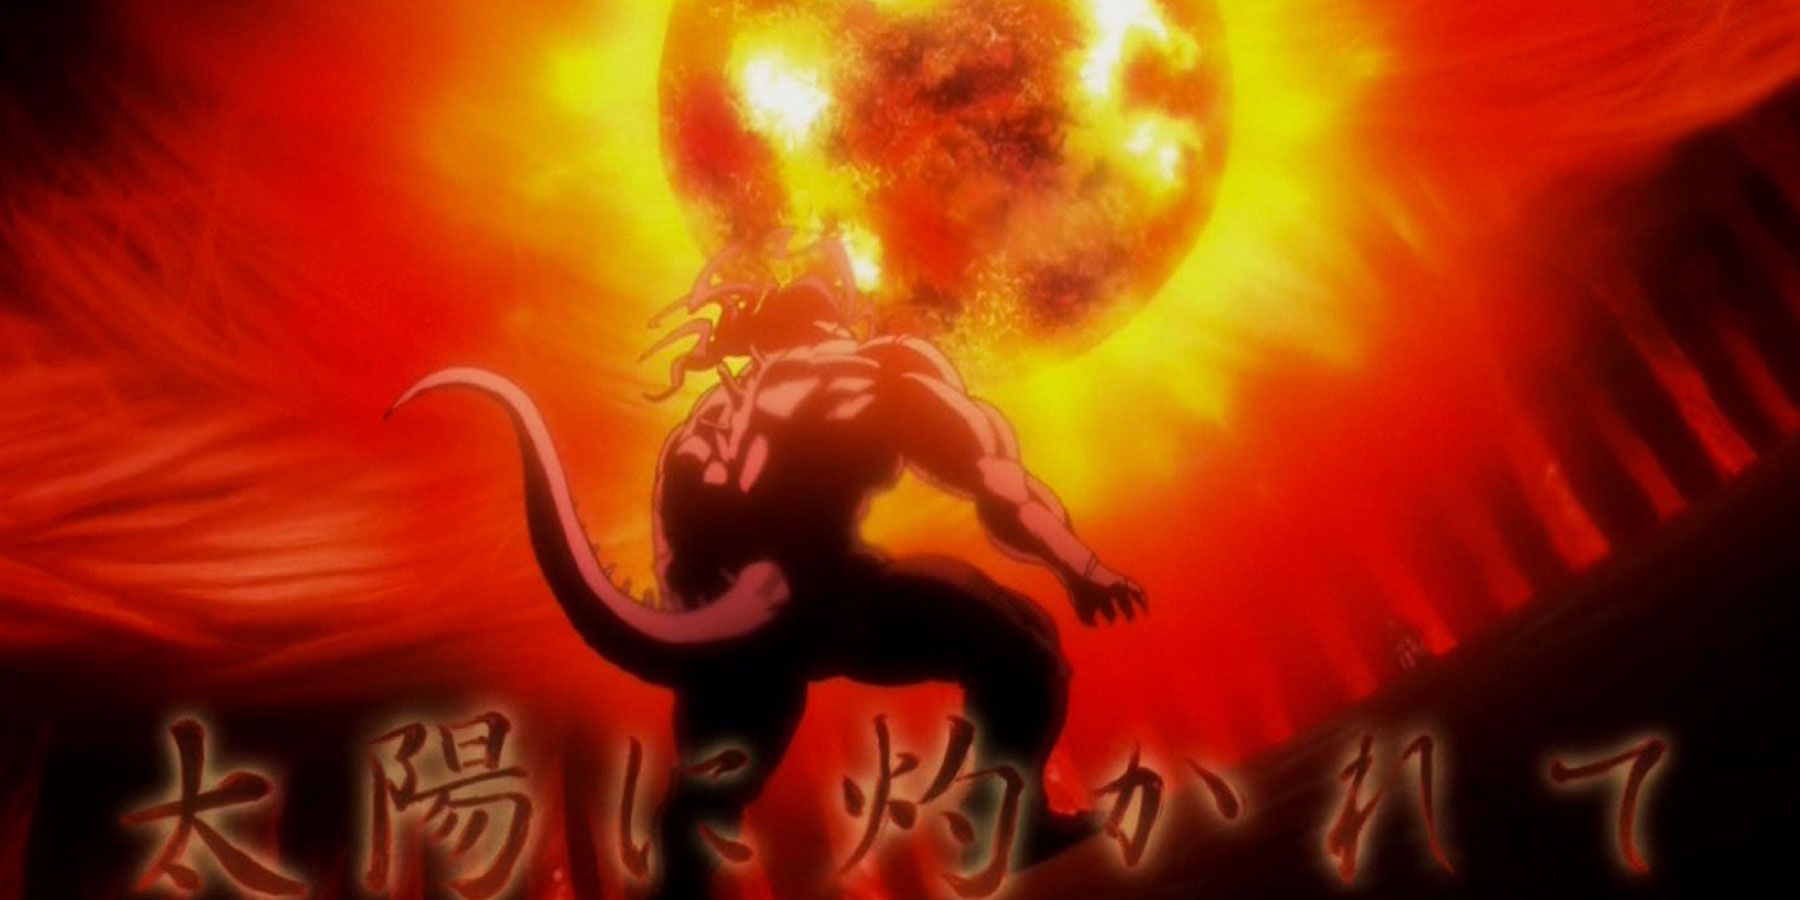 Feitan's special attack in Hunter x Hunter, Rising Sun, about to decimate an opponent.